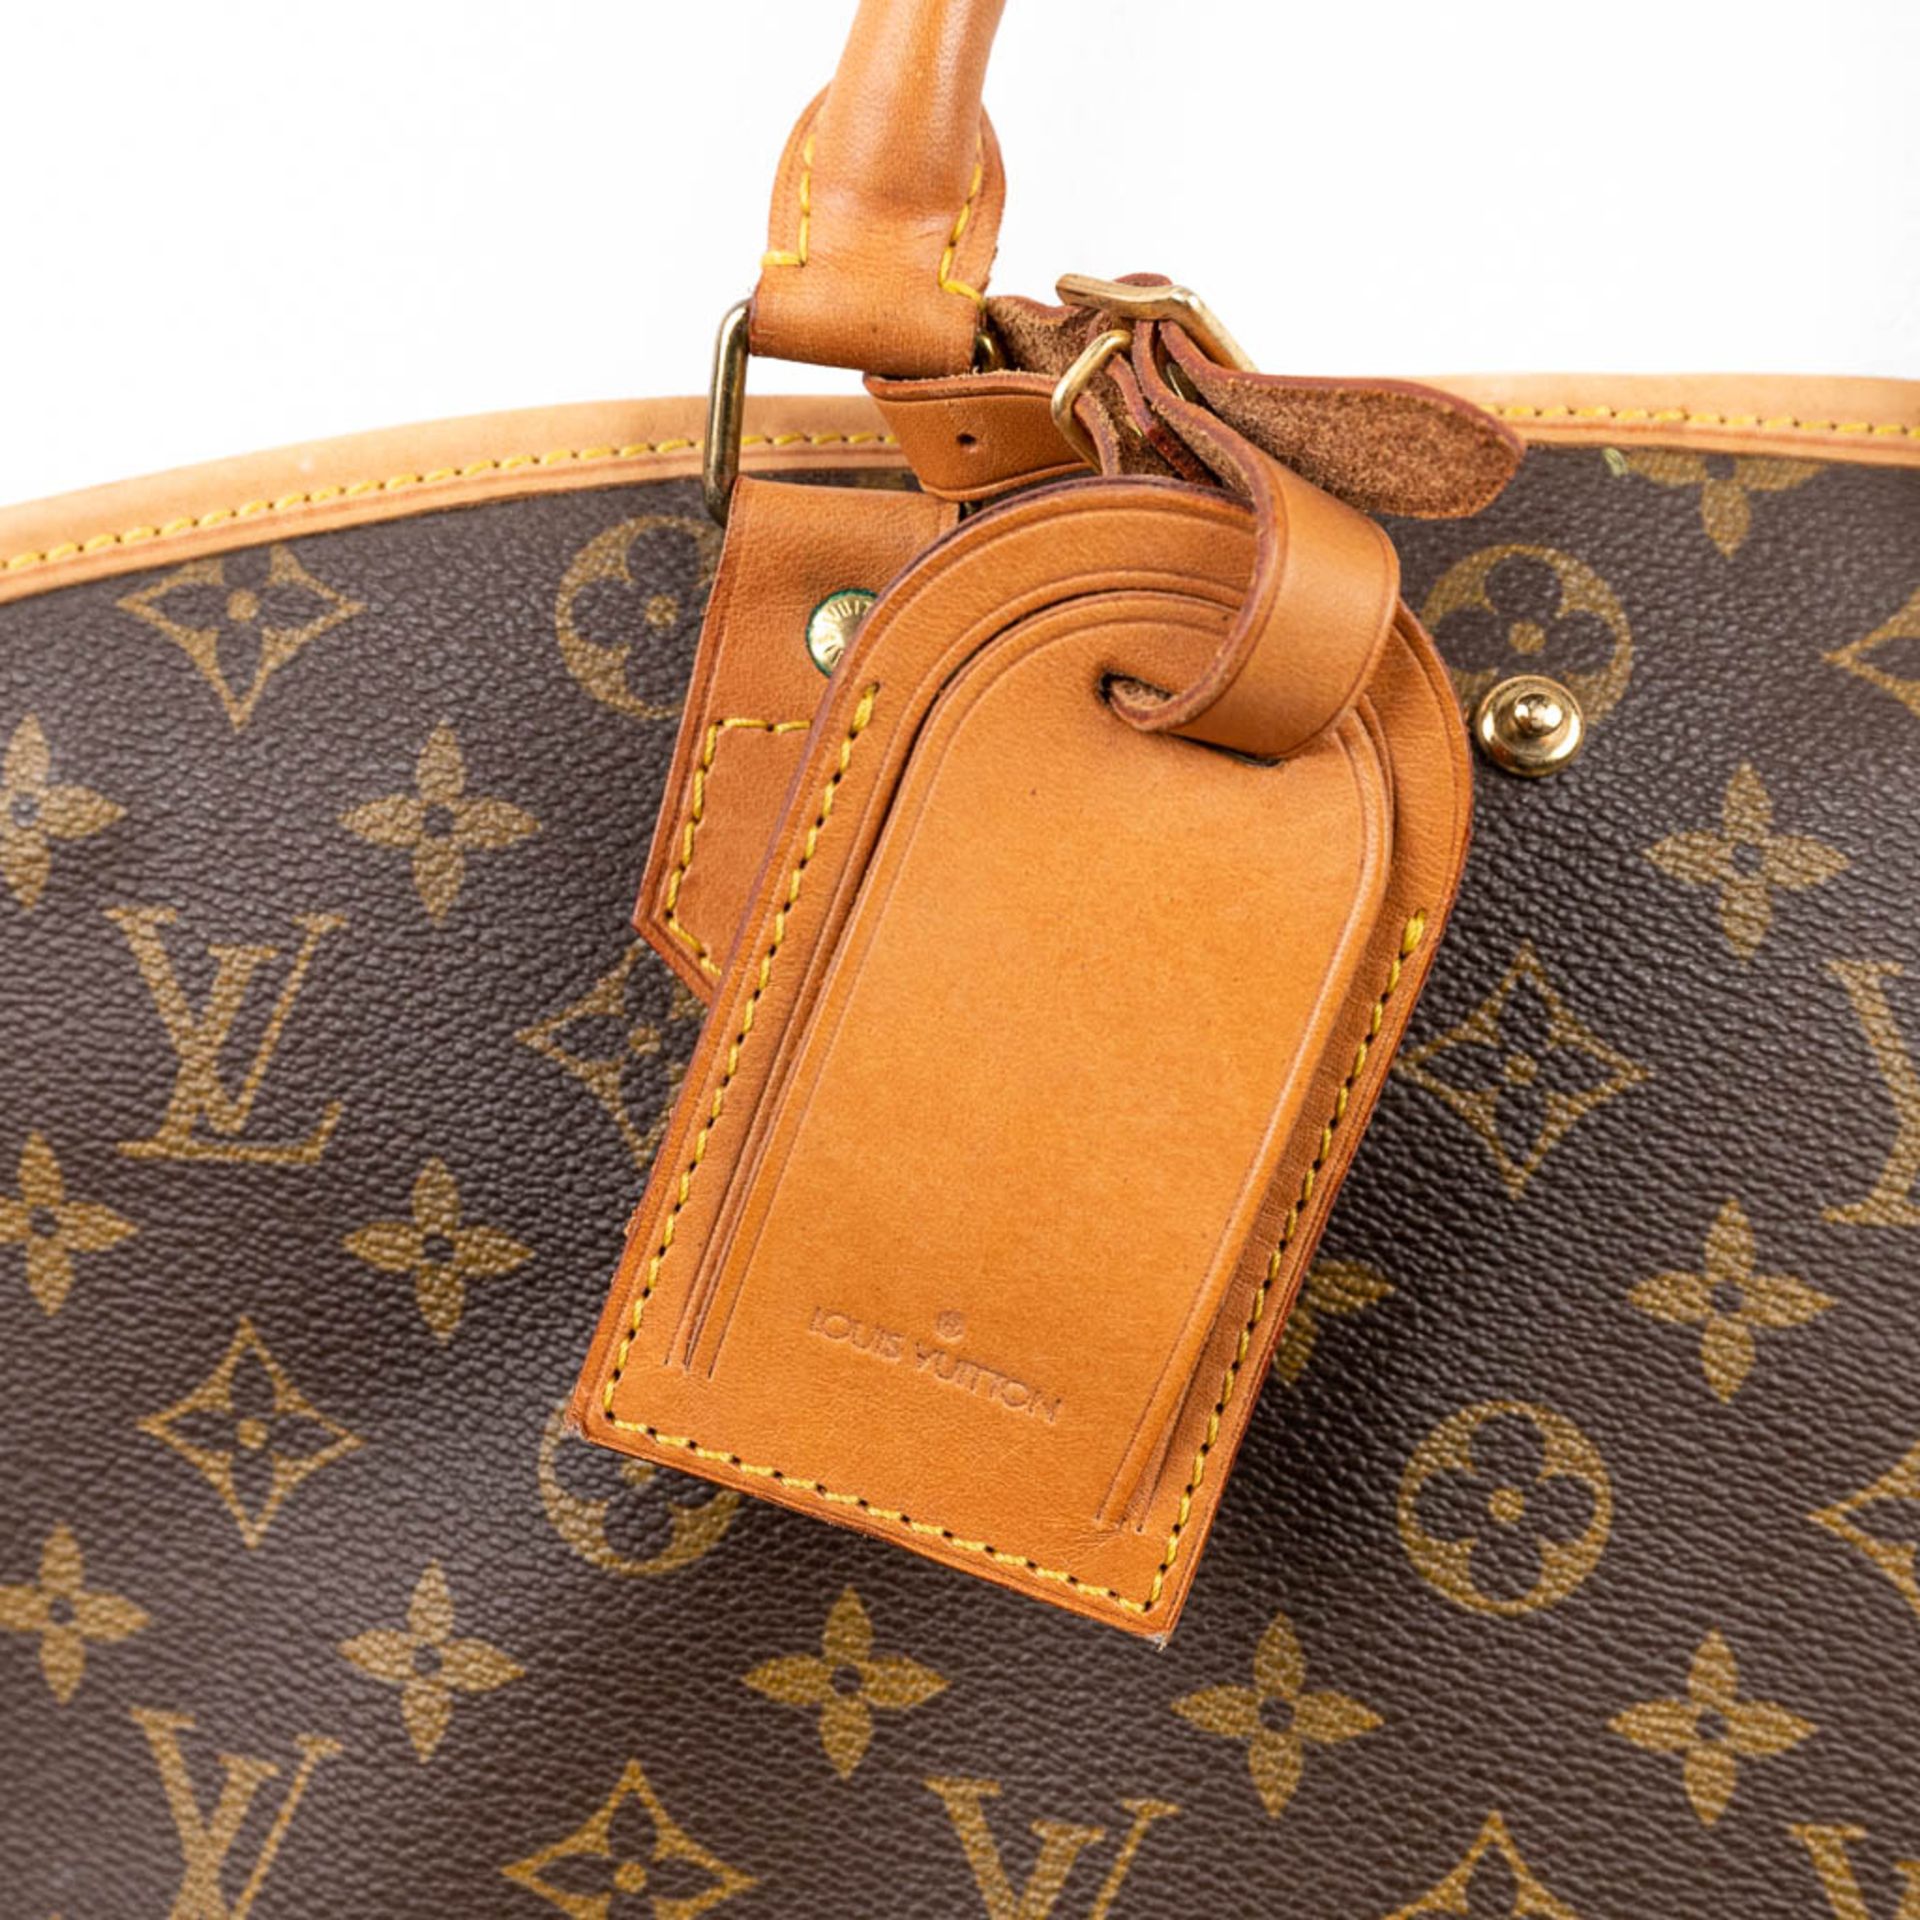 A garment suit traveller's bag made of leather by Louis Vuitton. (H:70cm) - Image 11 of 13